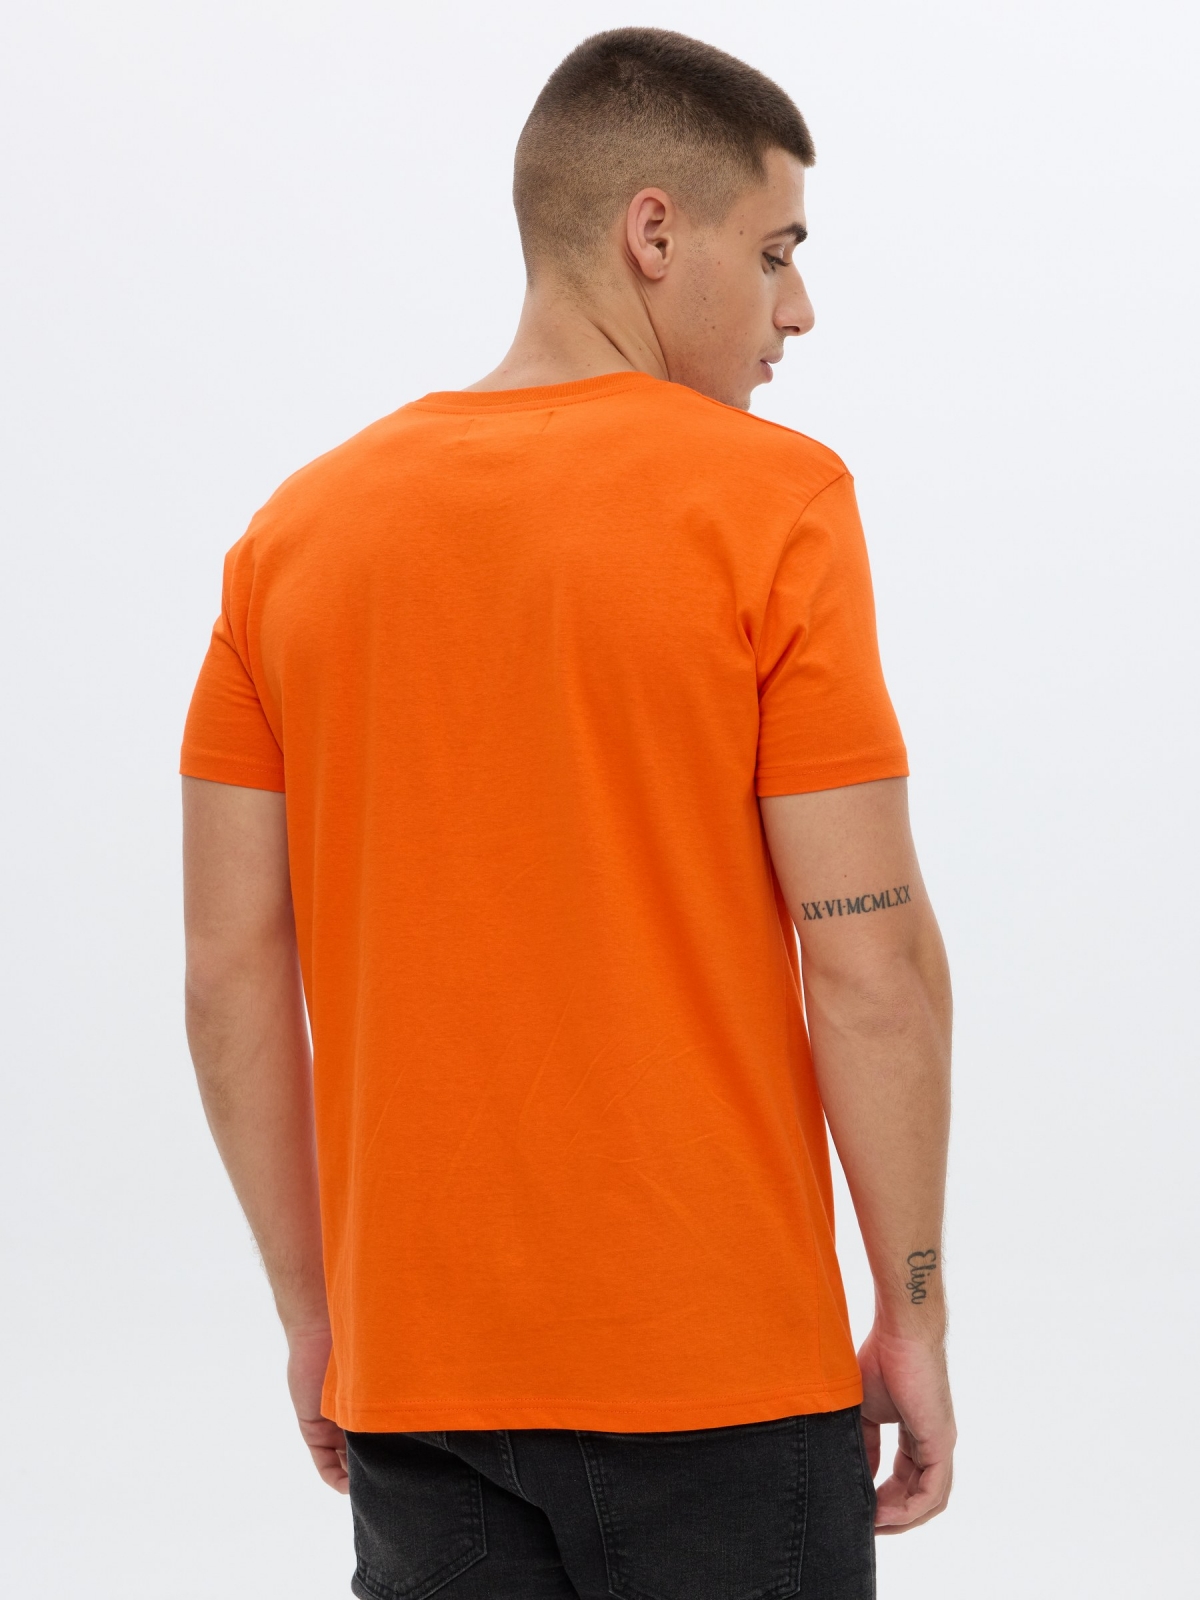 Create Yourself T-shirt orange middle back view